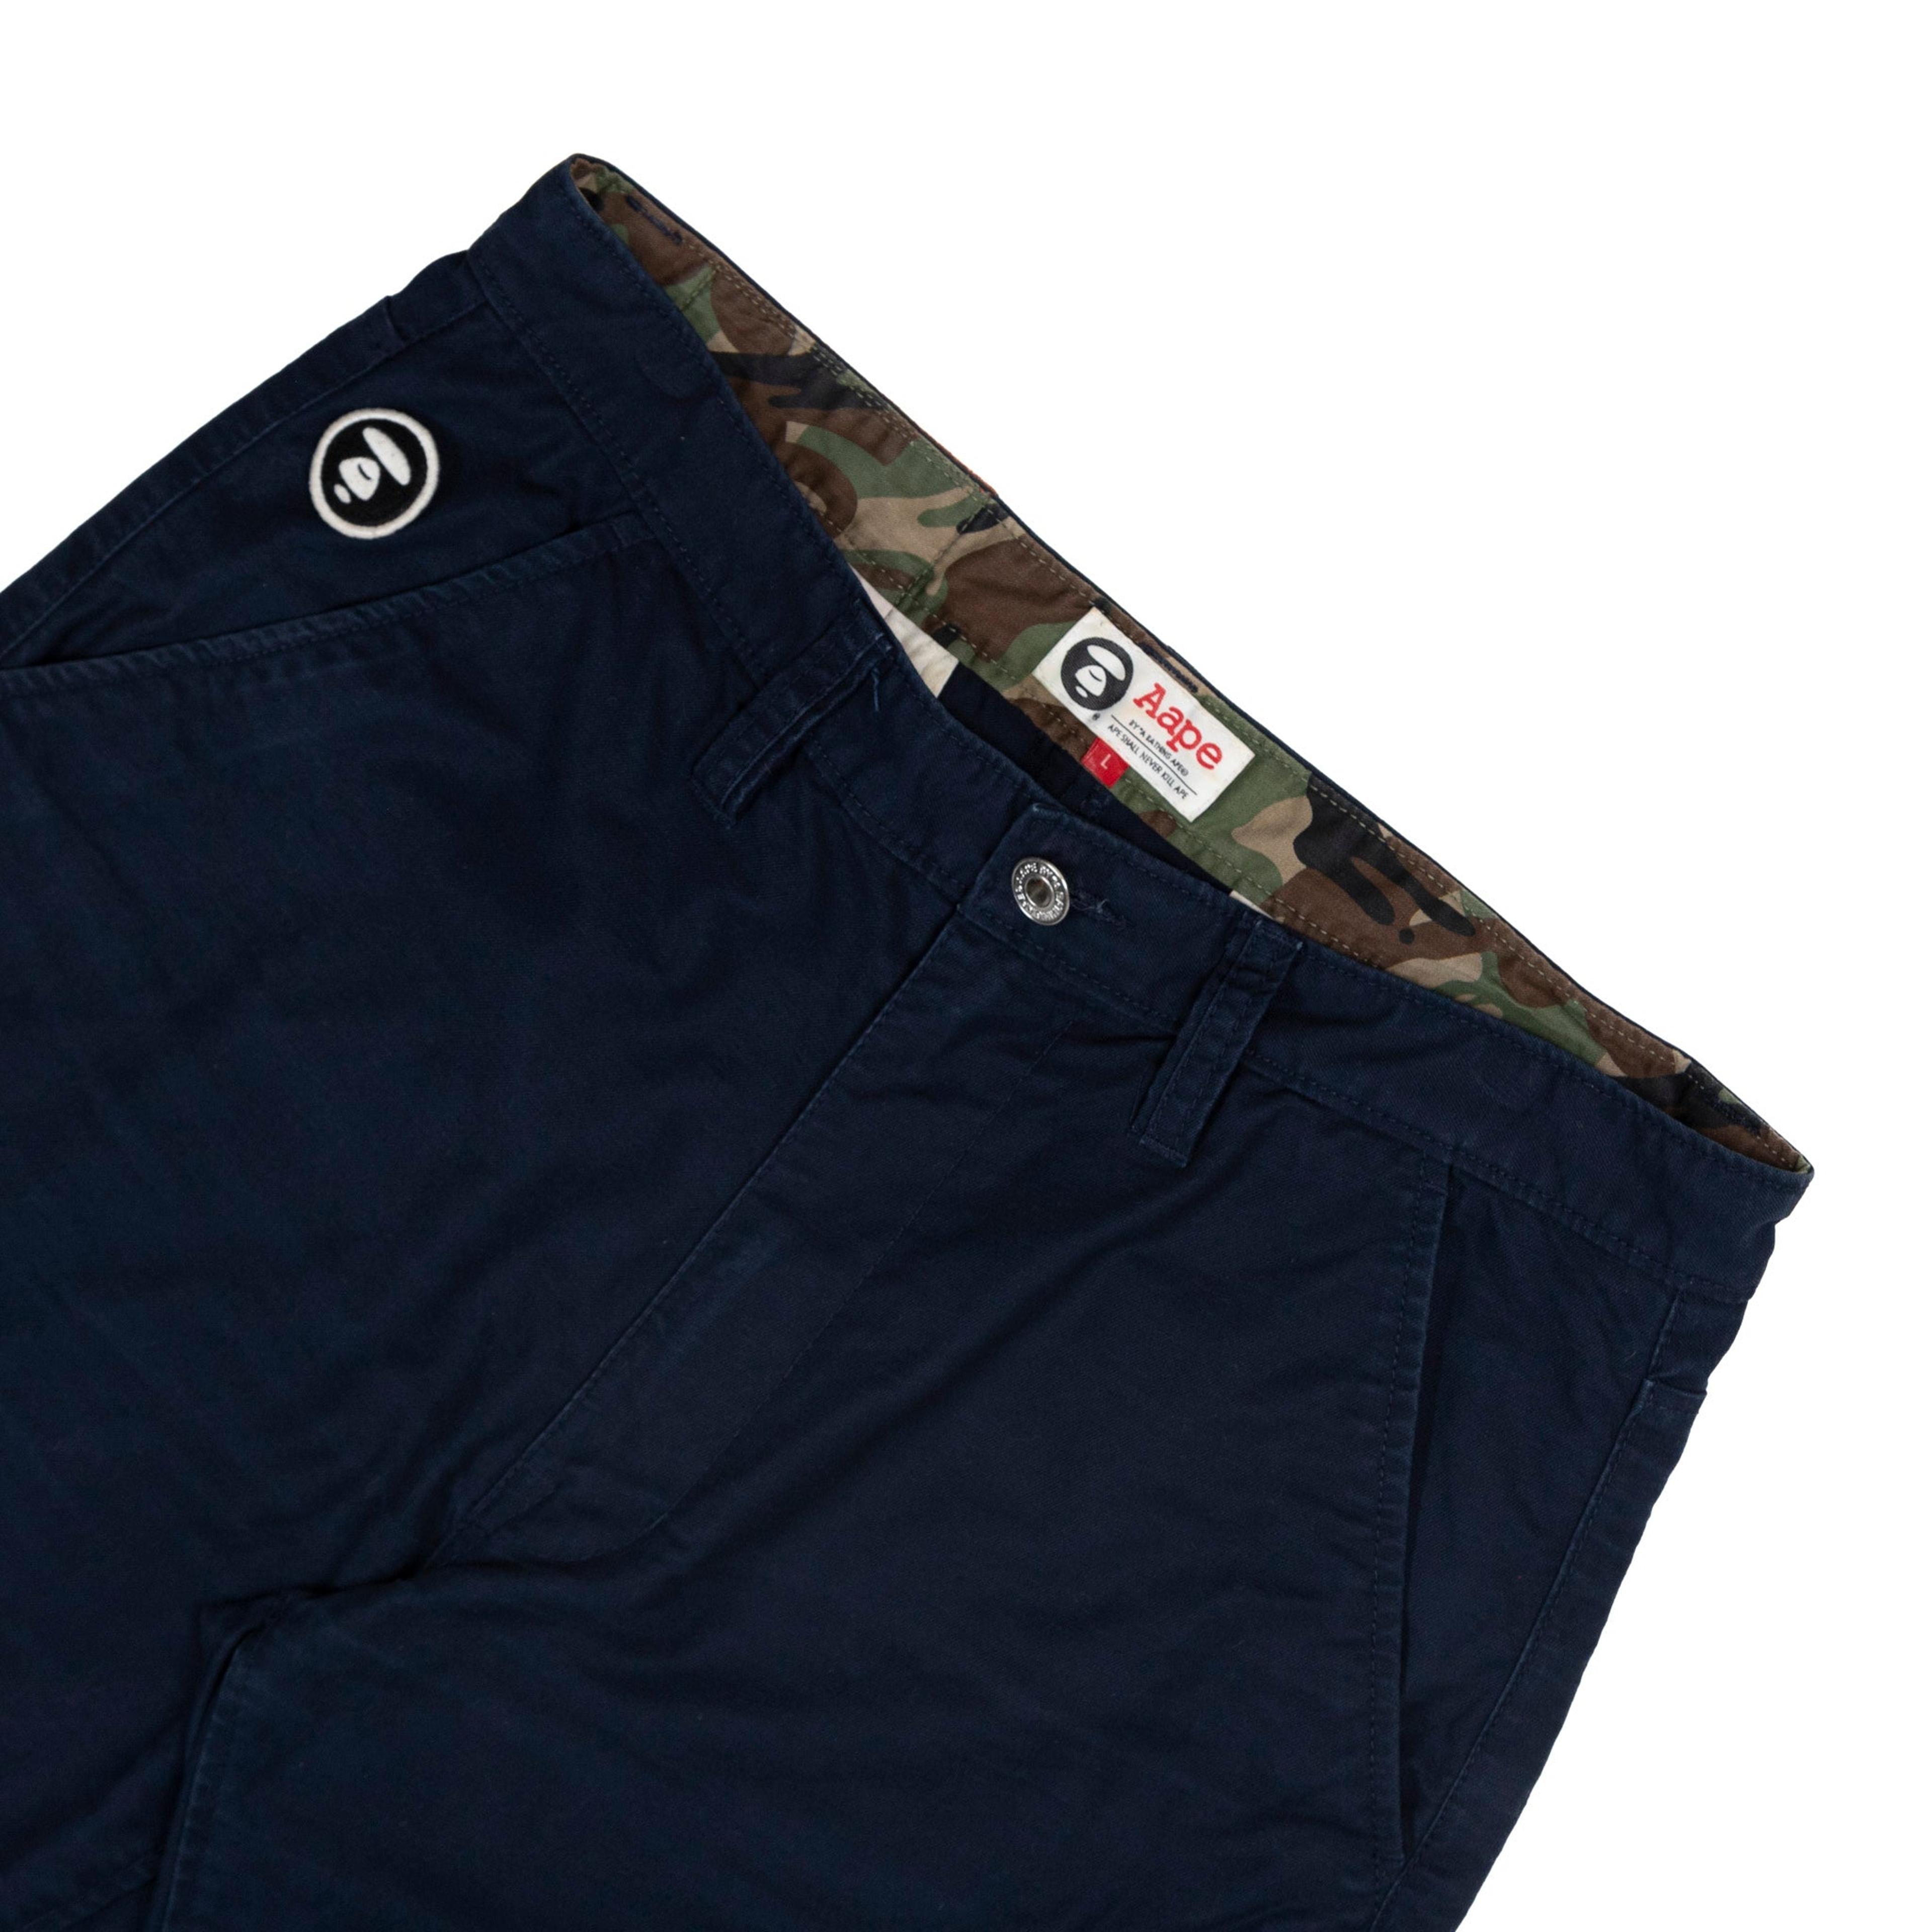 Alternate View 1 of Aape by A Bathing Ape Summer Shorts